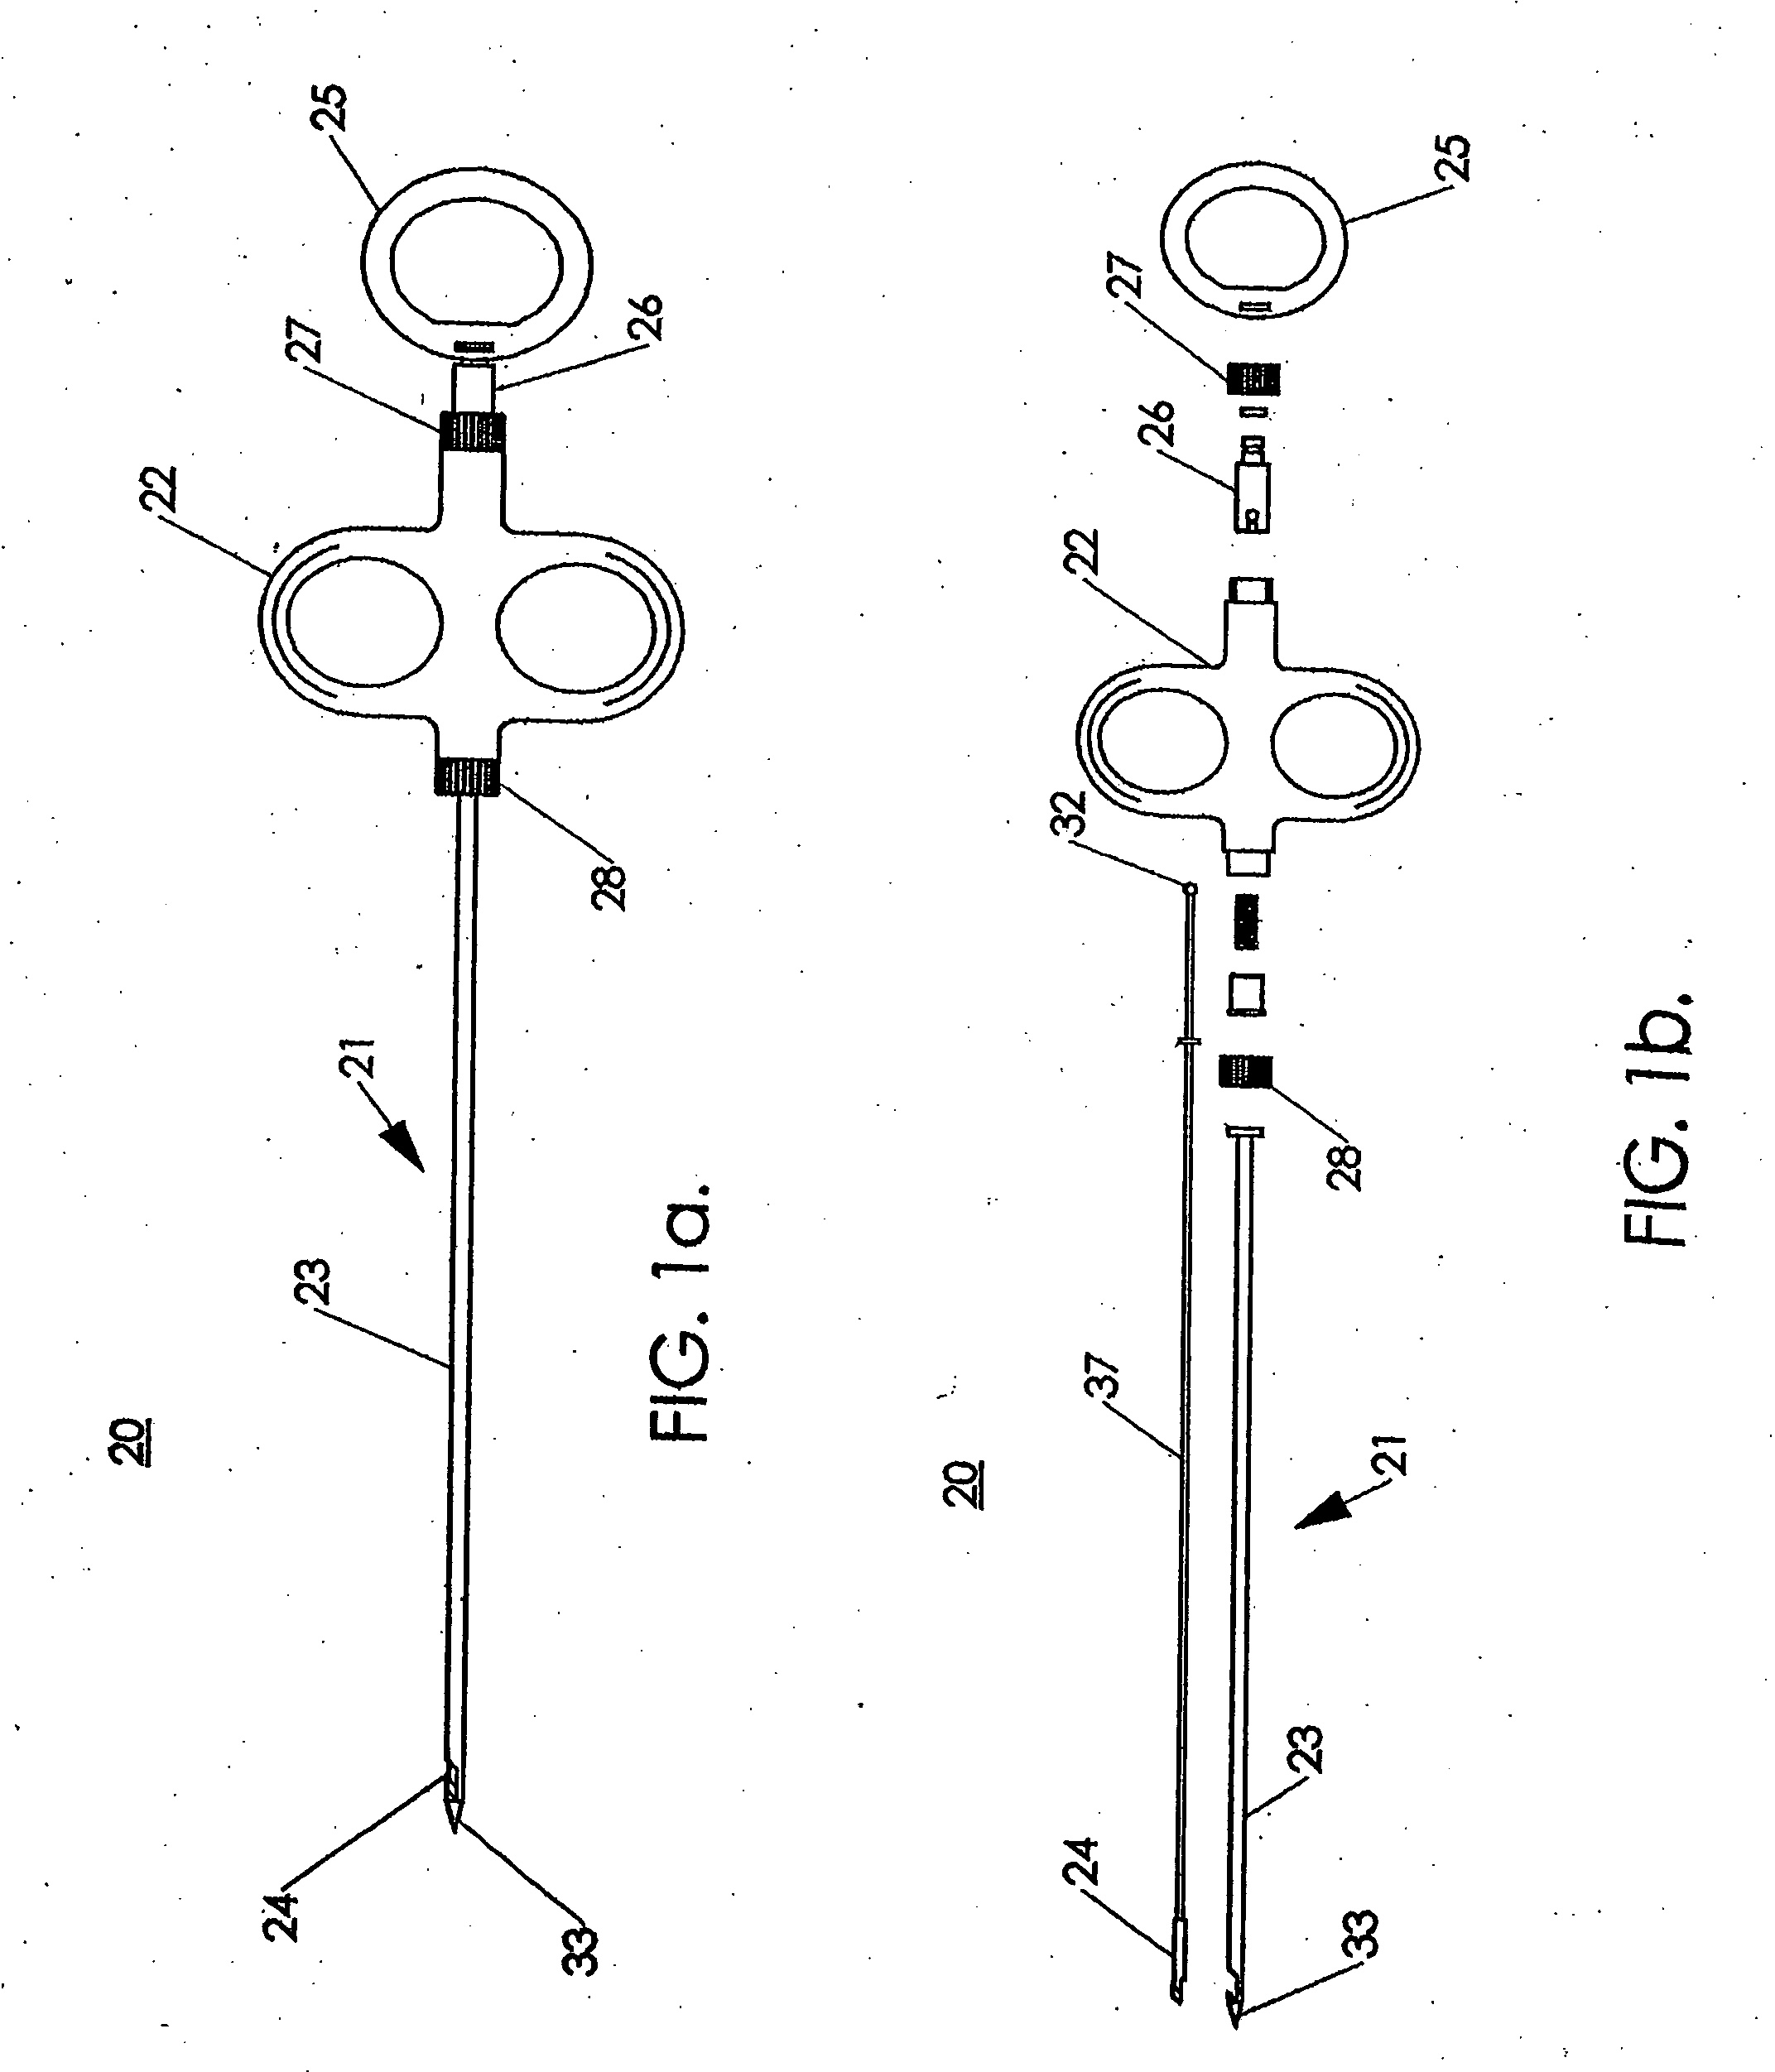 Surgical closure instrument and methods